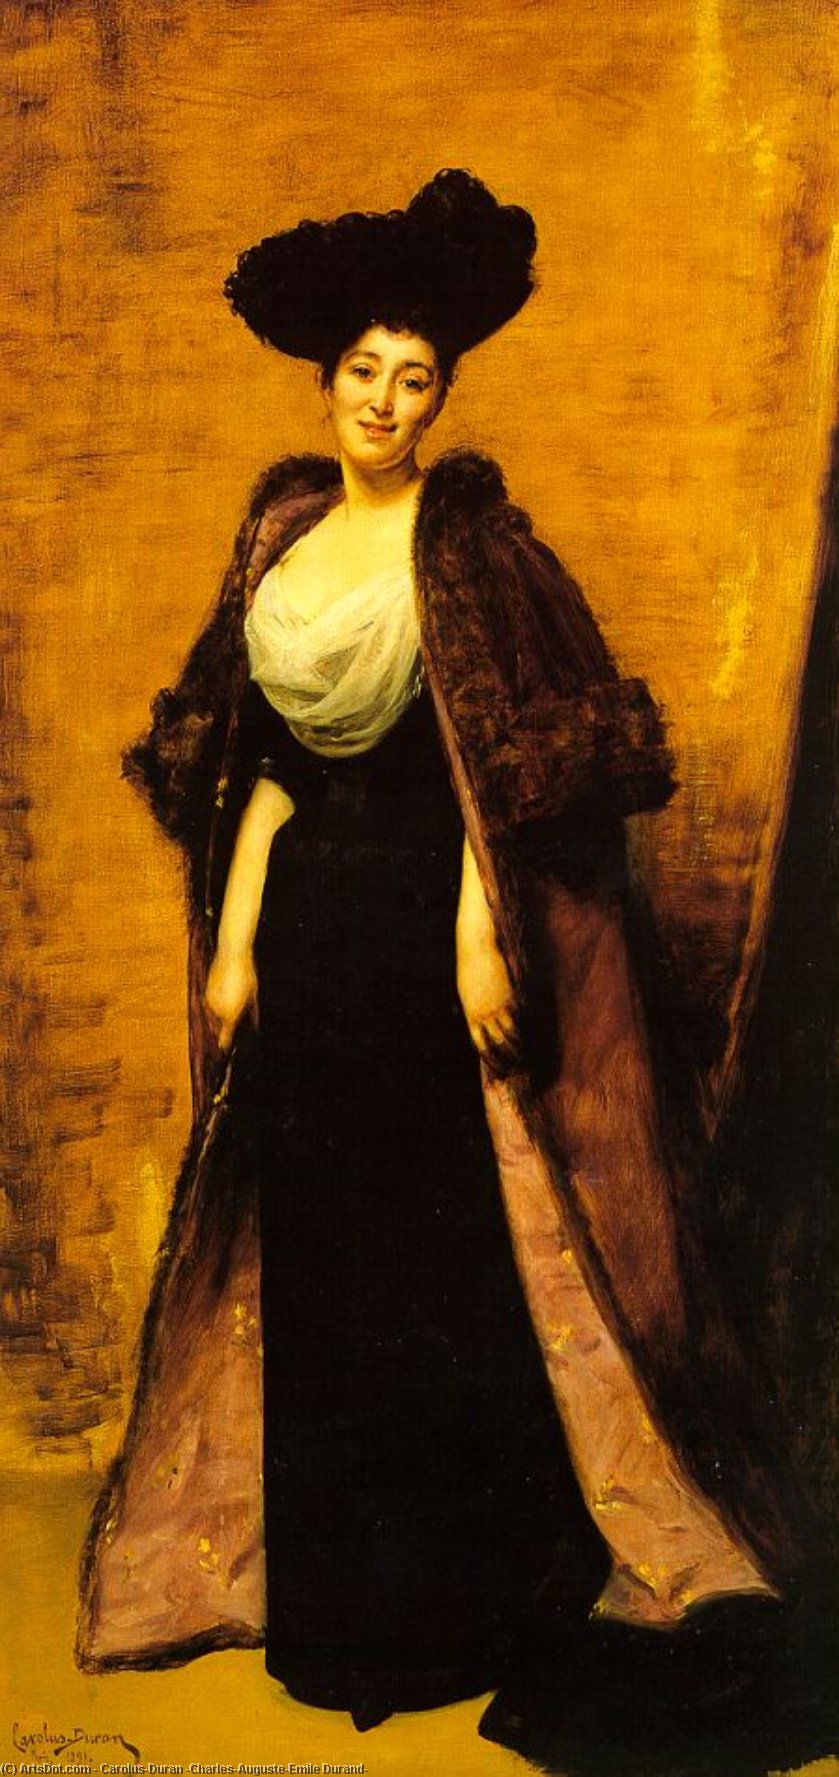 WikiOO.org - 백과 사전 - 회화, 삽화 Carolus-Duran (Charles-Auguste-Emile Durand) - Margaret Anderson, Wife of the Honorable Ronald Grenville